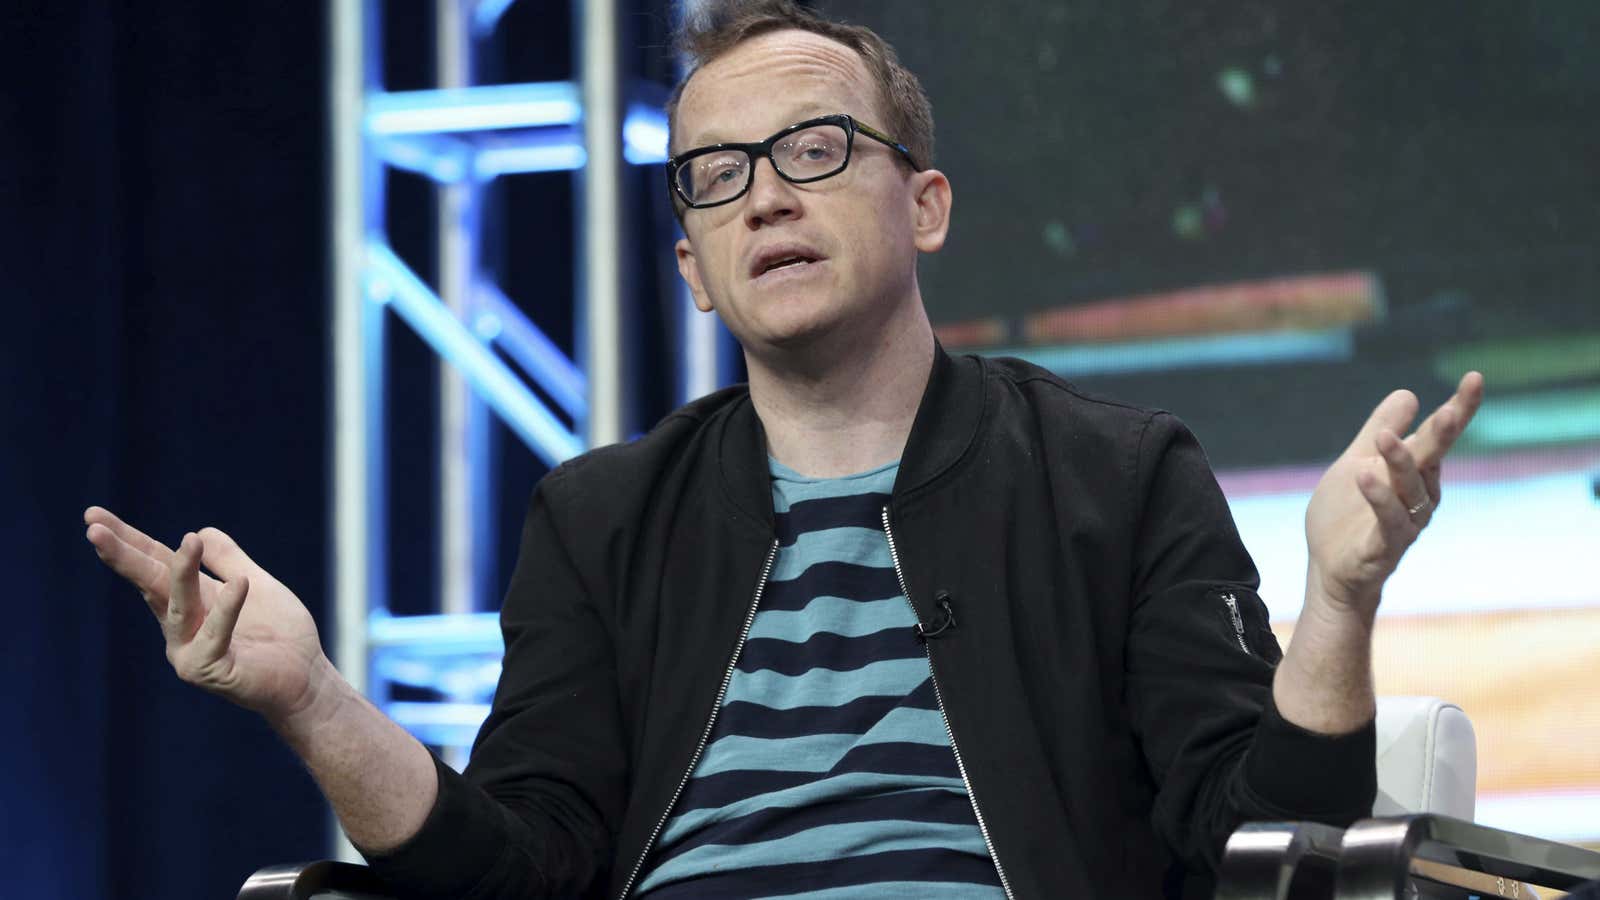 In the HBO special “Career Suicide,” Chris Gethard discusses the depression thats gripped him from childhood.